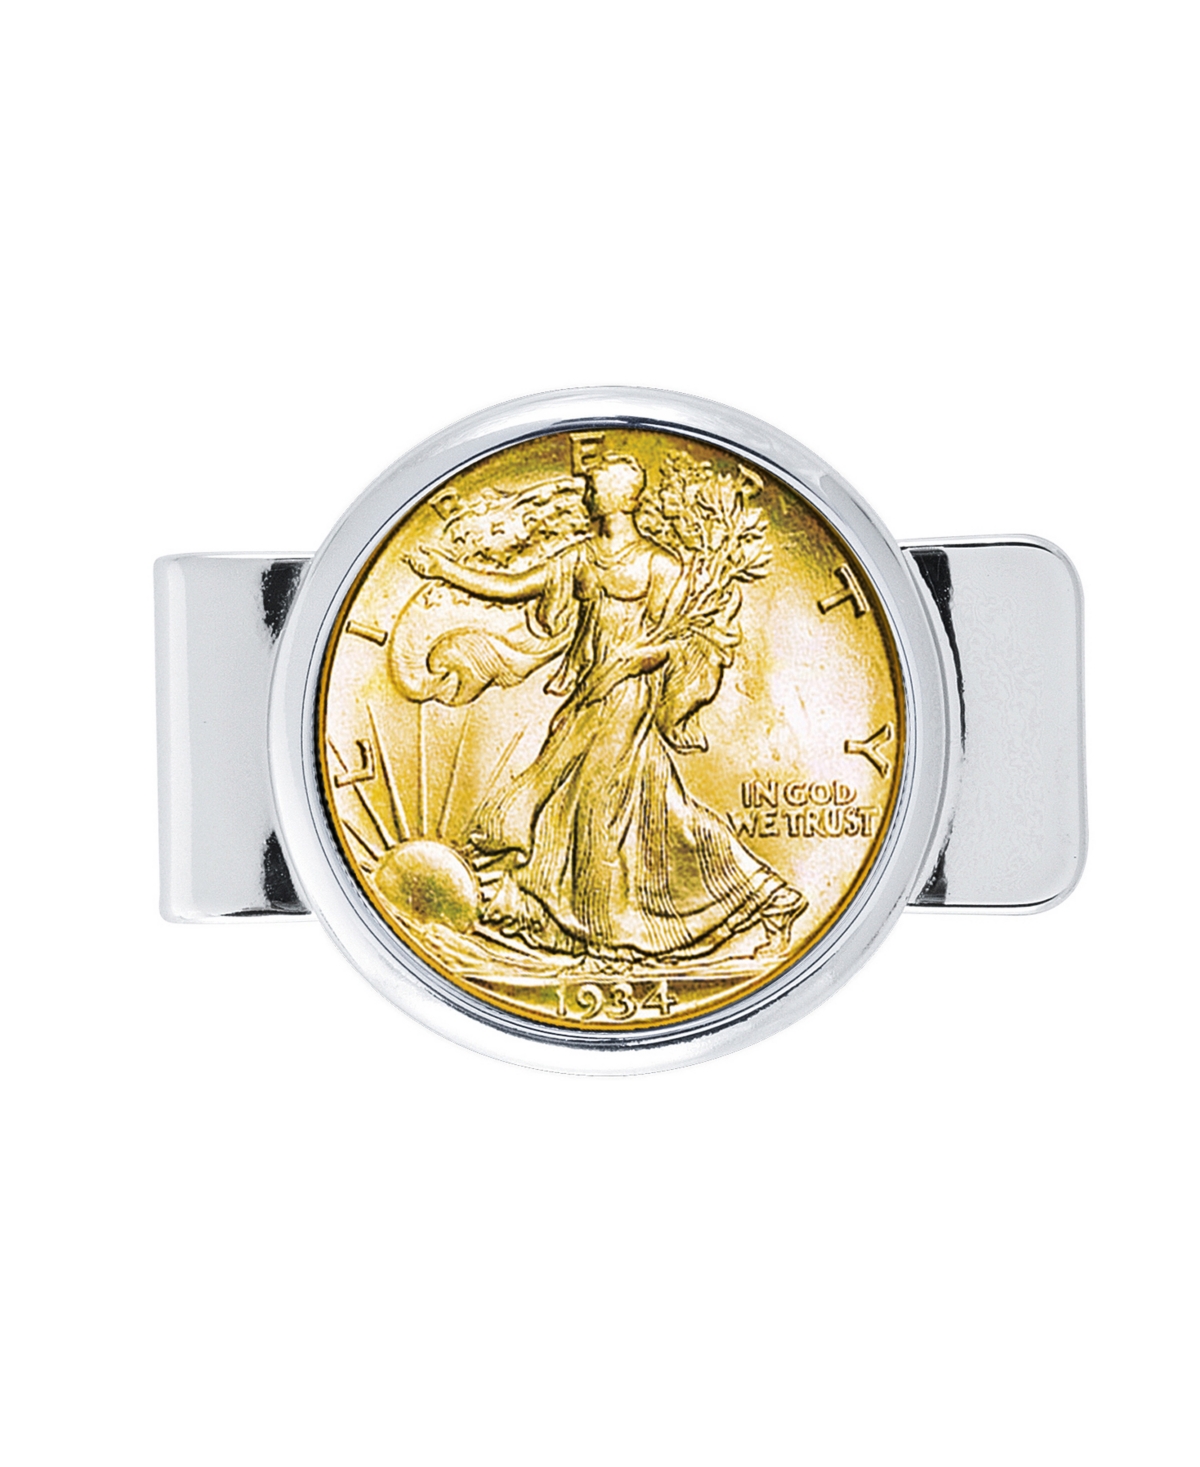 Men's American Coin Treasures Coin Money Clip with Silver Walking Liberty Half Dollar Layered In Pure Gold - Silver